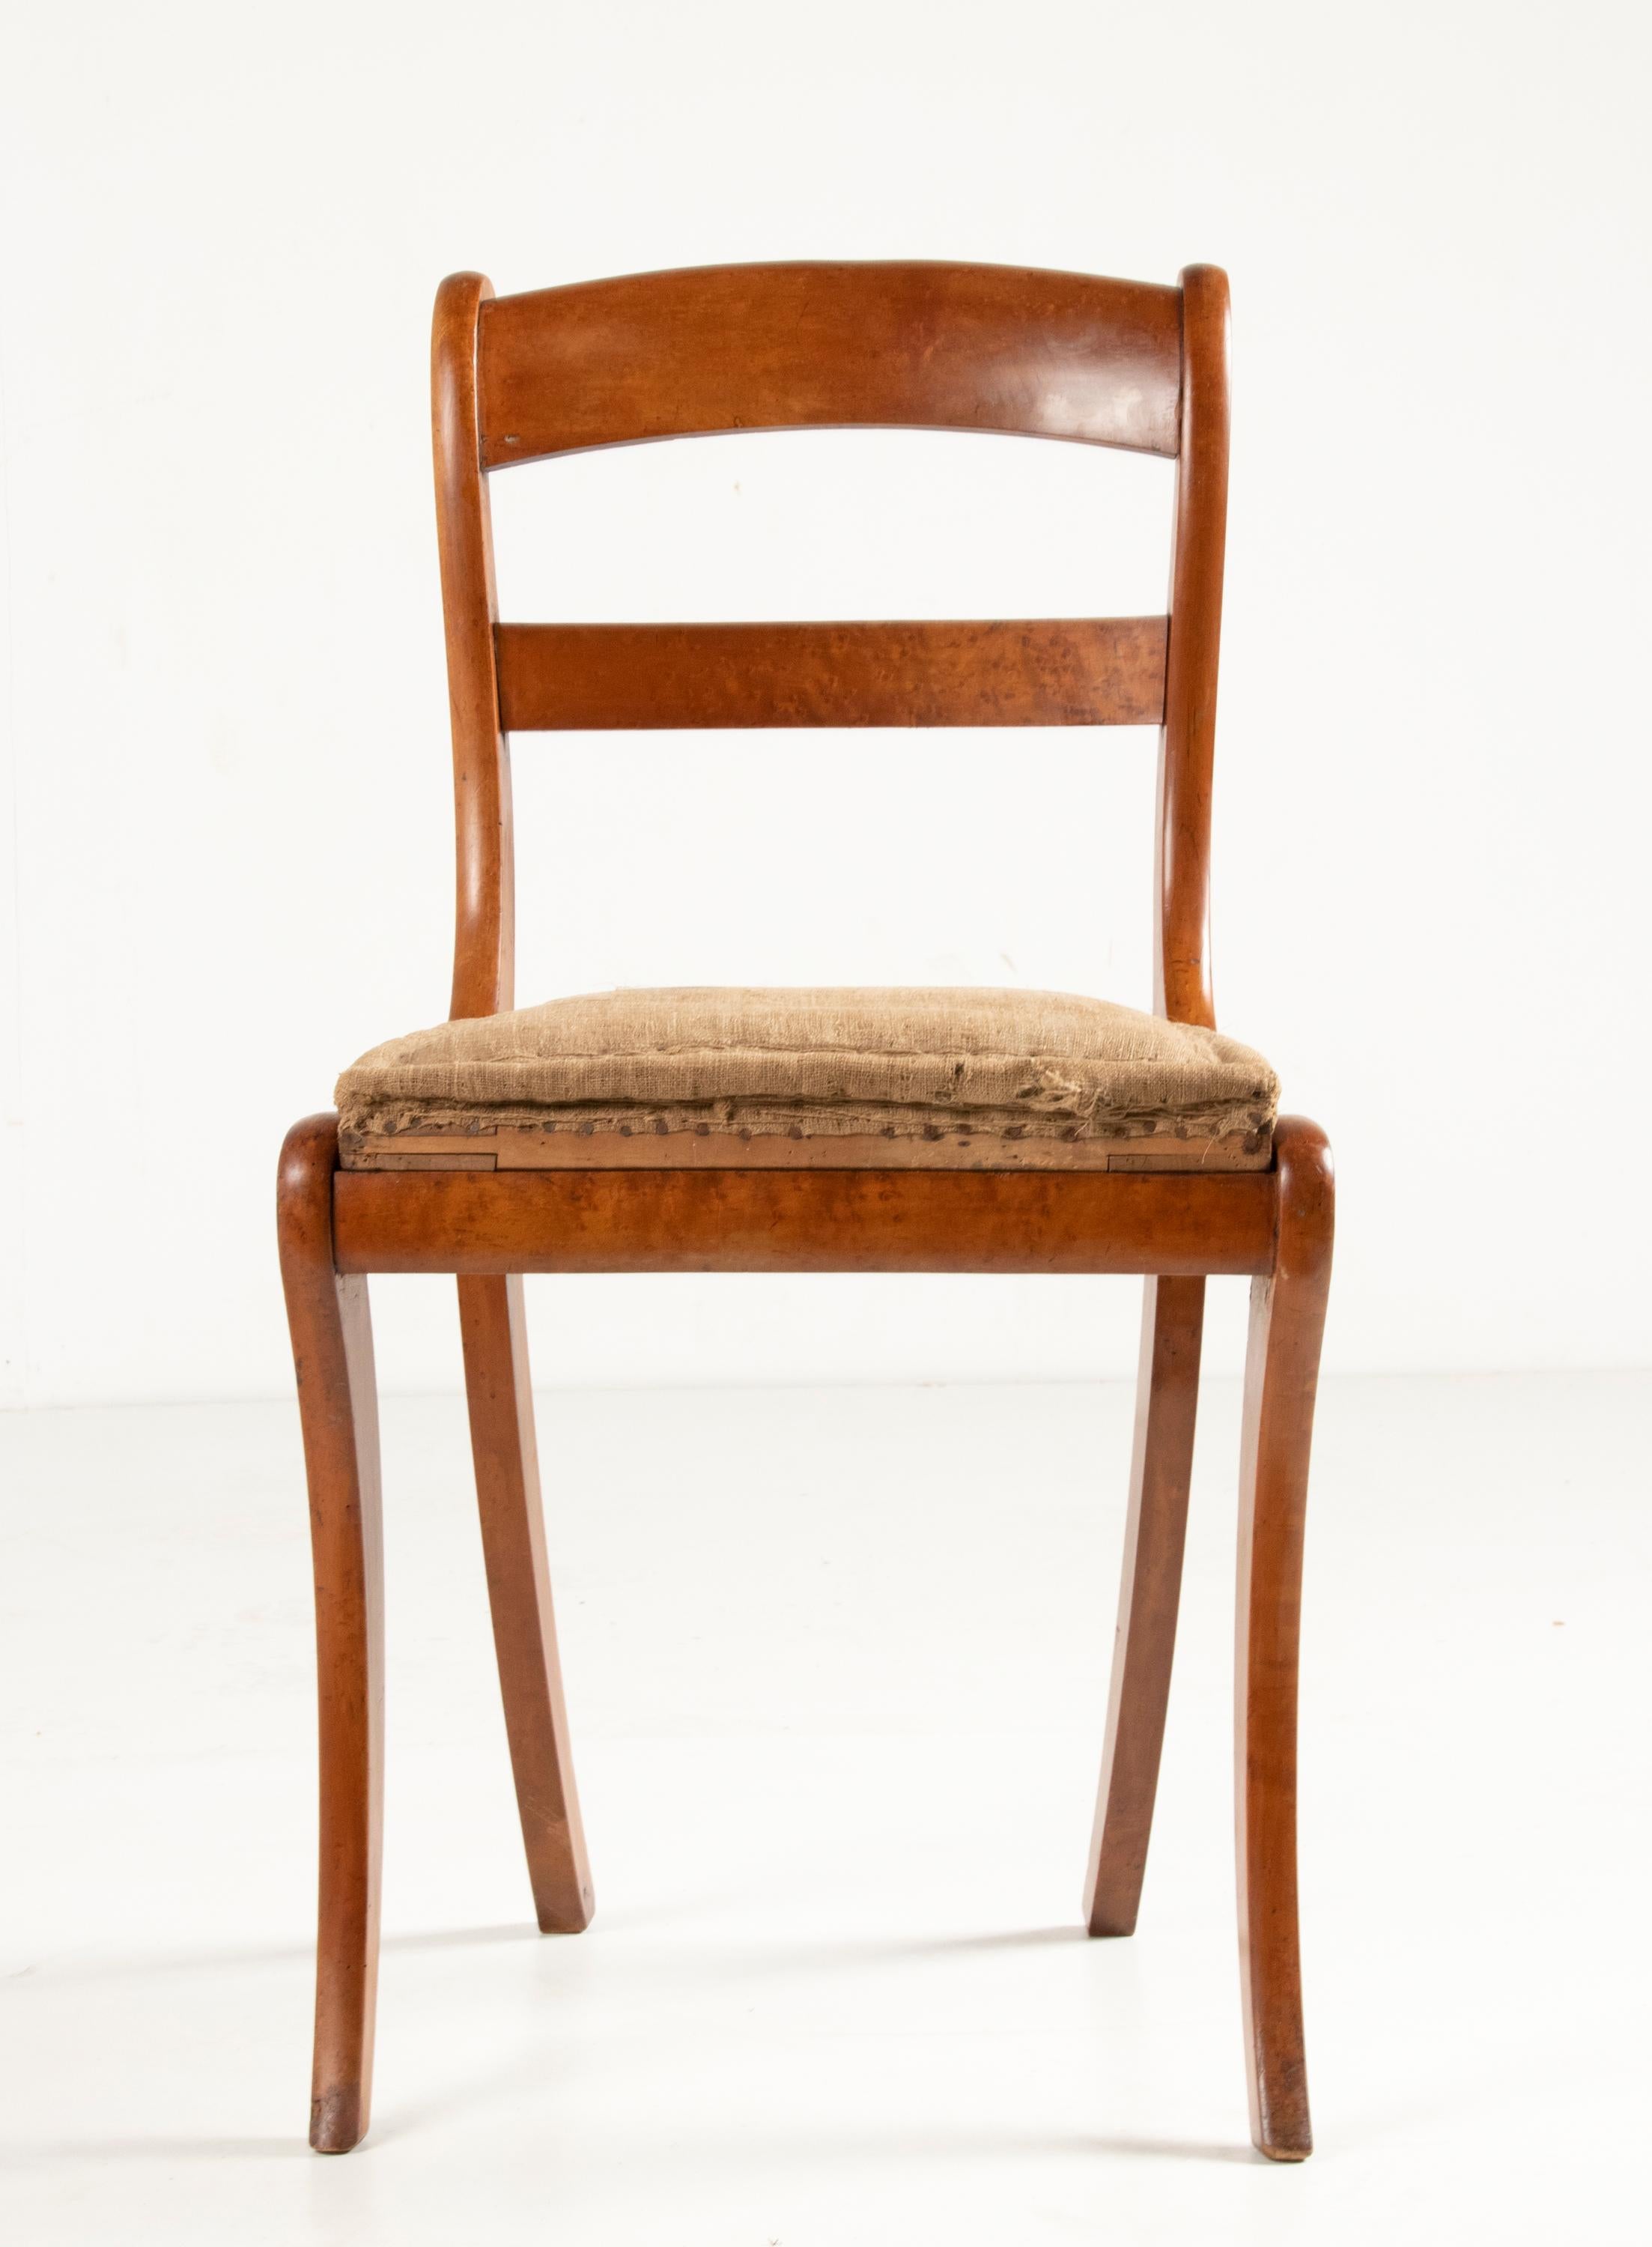 Hand-Crafted Early 19th Century Charles X Birds-Eye Maple Wood Dining Chairs For Sale